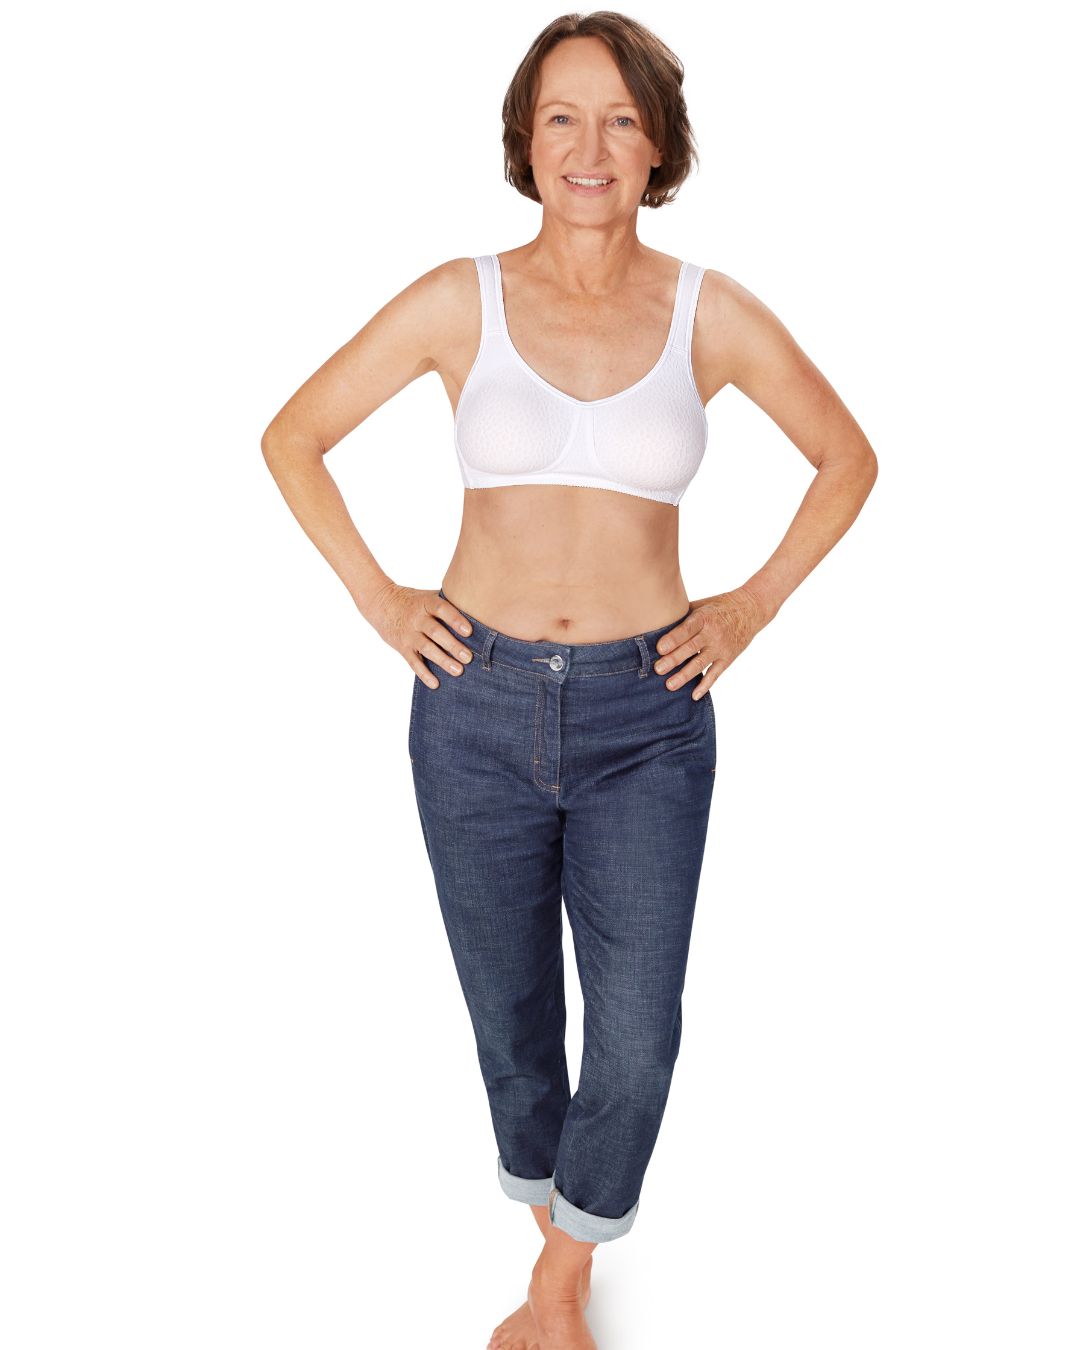 The Amoena Mona Bra is a popular choice with seamless, non-wired cups and bi-lateral pockets. Made with Meryl Microfibre for superior comfort and support. The straps are lightly padded and designed to be wider across the shoulders, reducing tension on the neck and shoulders. This bra is suitable for post-surgery wear and comes in white, black, and champagne colors. If your size is not available, please contact us for assistance. Discover the exceptional fit and comfort of the Amoena Mona Bra